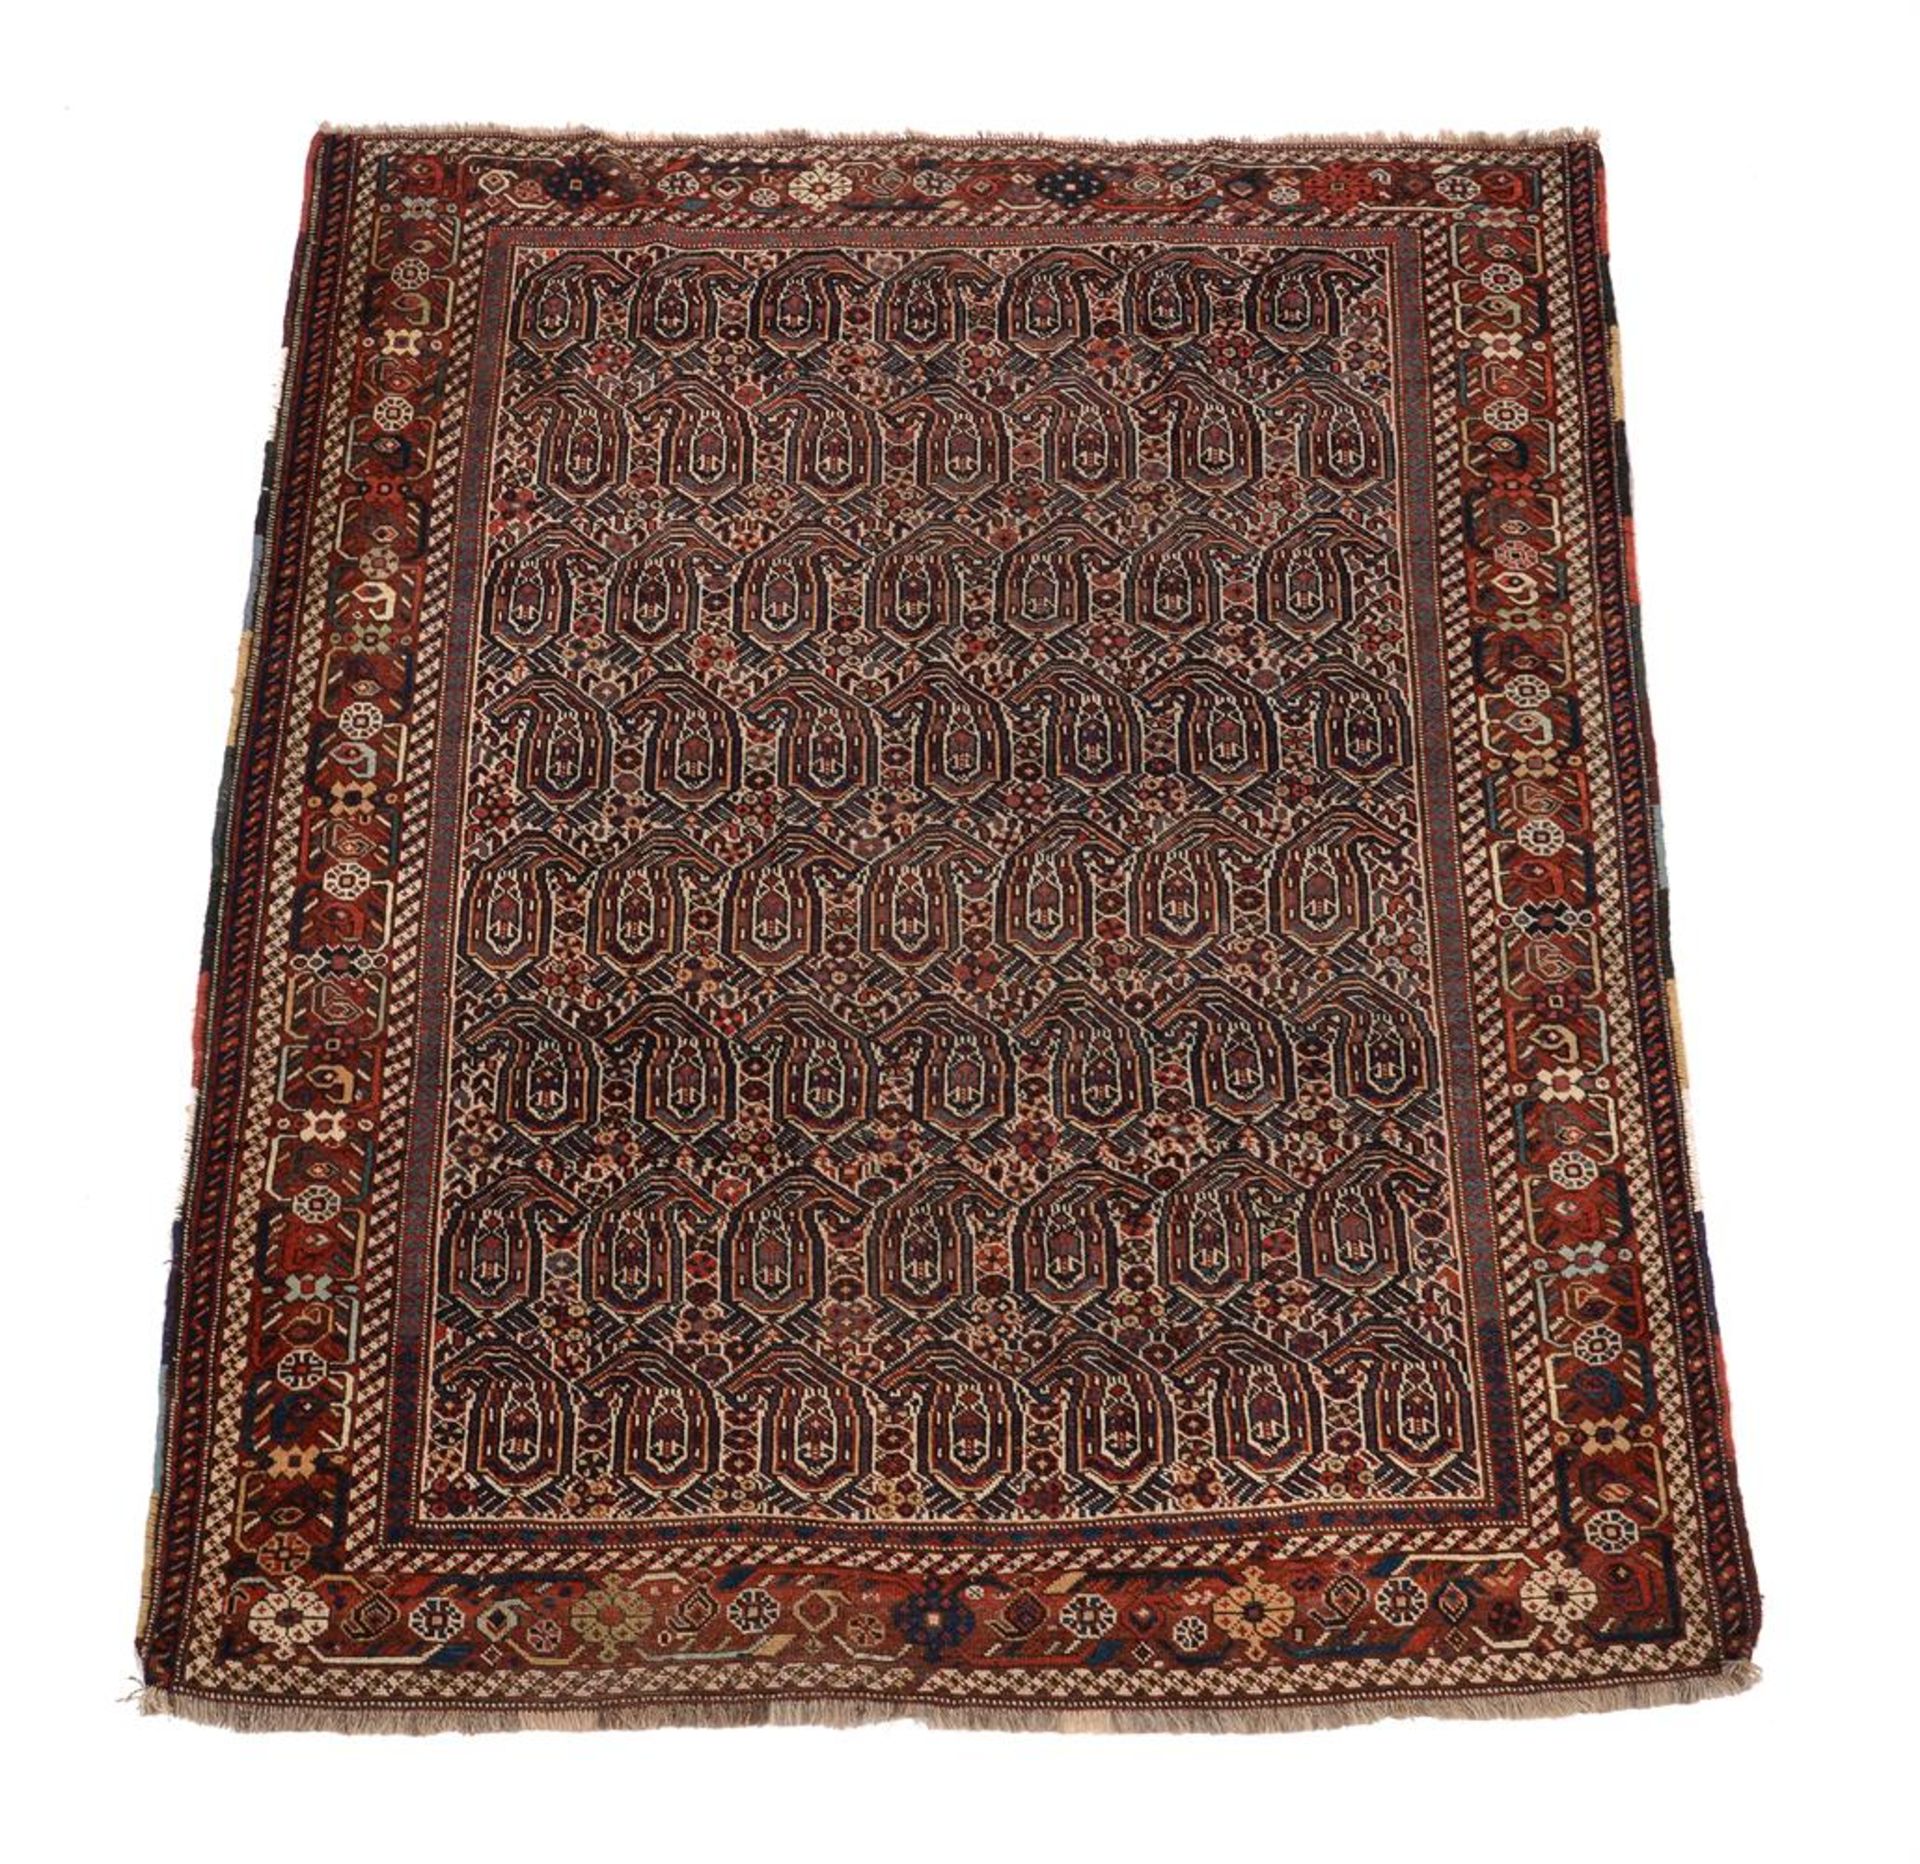 AN AFSHAR RUG, approximately 185 x 153cm